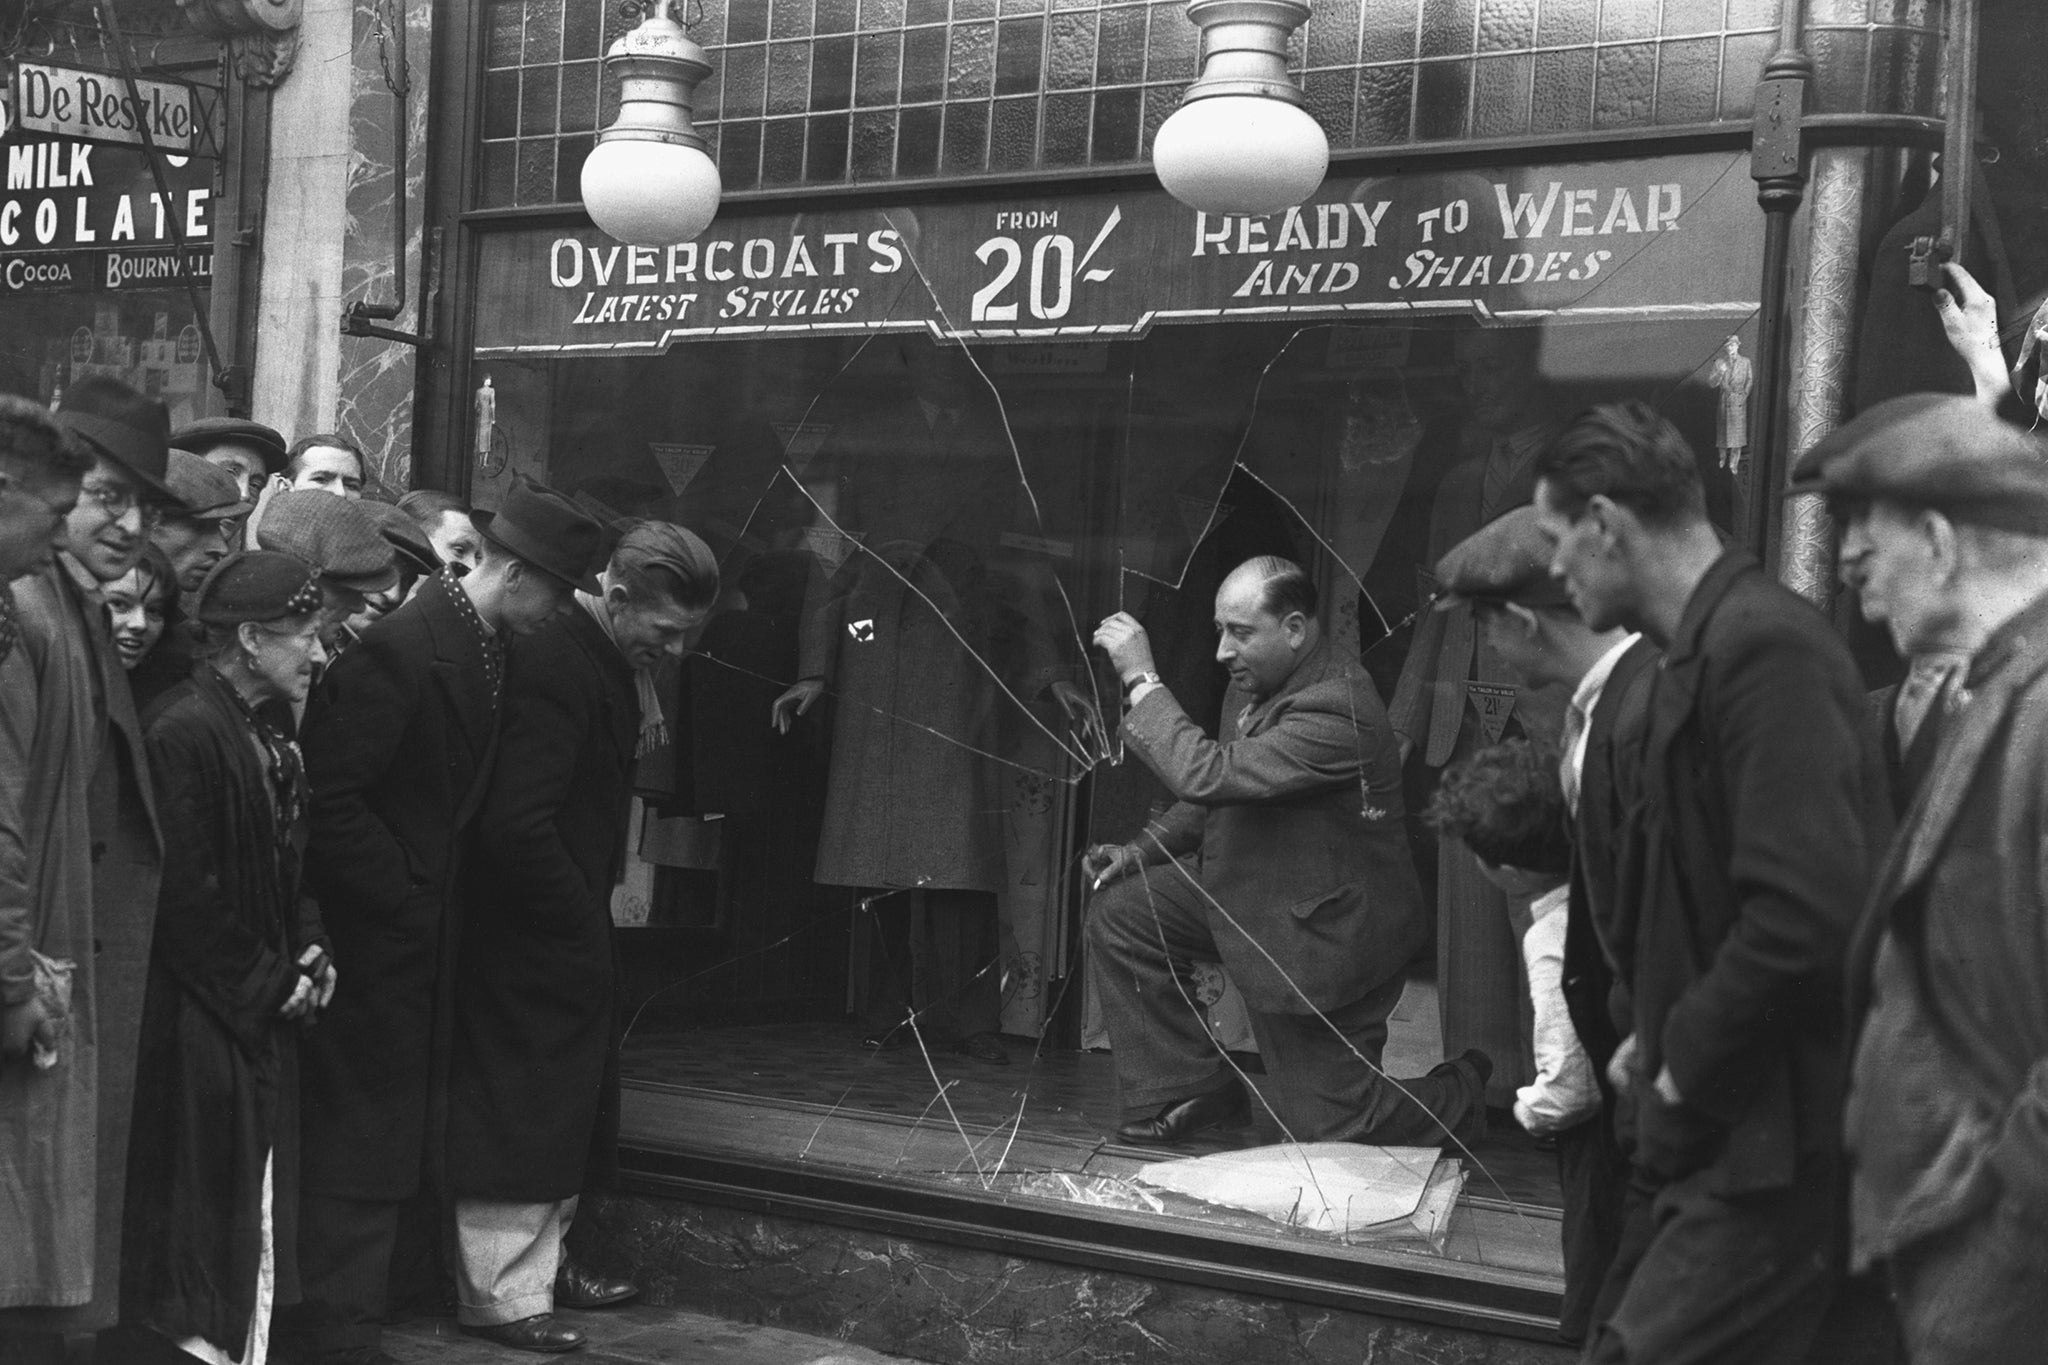 The broken window of a Jewish tailor’s shop in Bethnal Green, London, in 1936 after an antisemitic attack the previous night